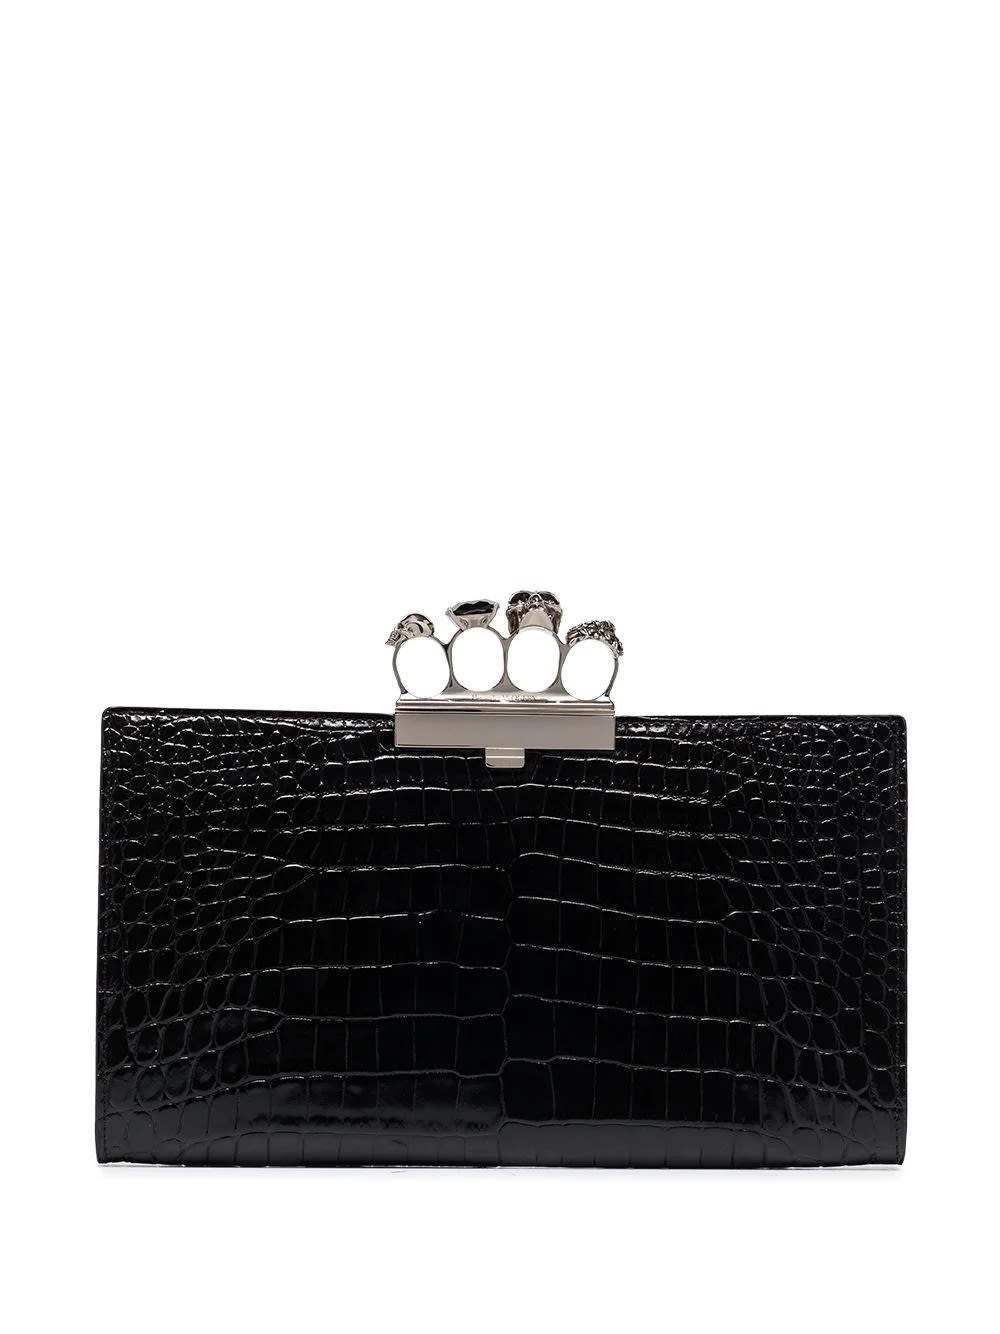 ALEXANDER MCQUEEN BLACK FOUR-RING SKULL FLAT CLUTCH WITH CROCODILE EFFECT